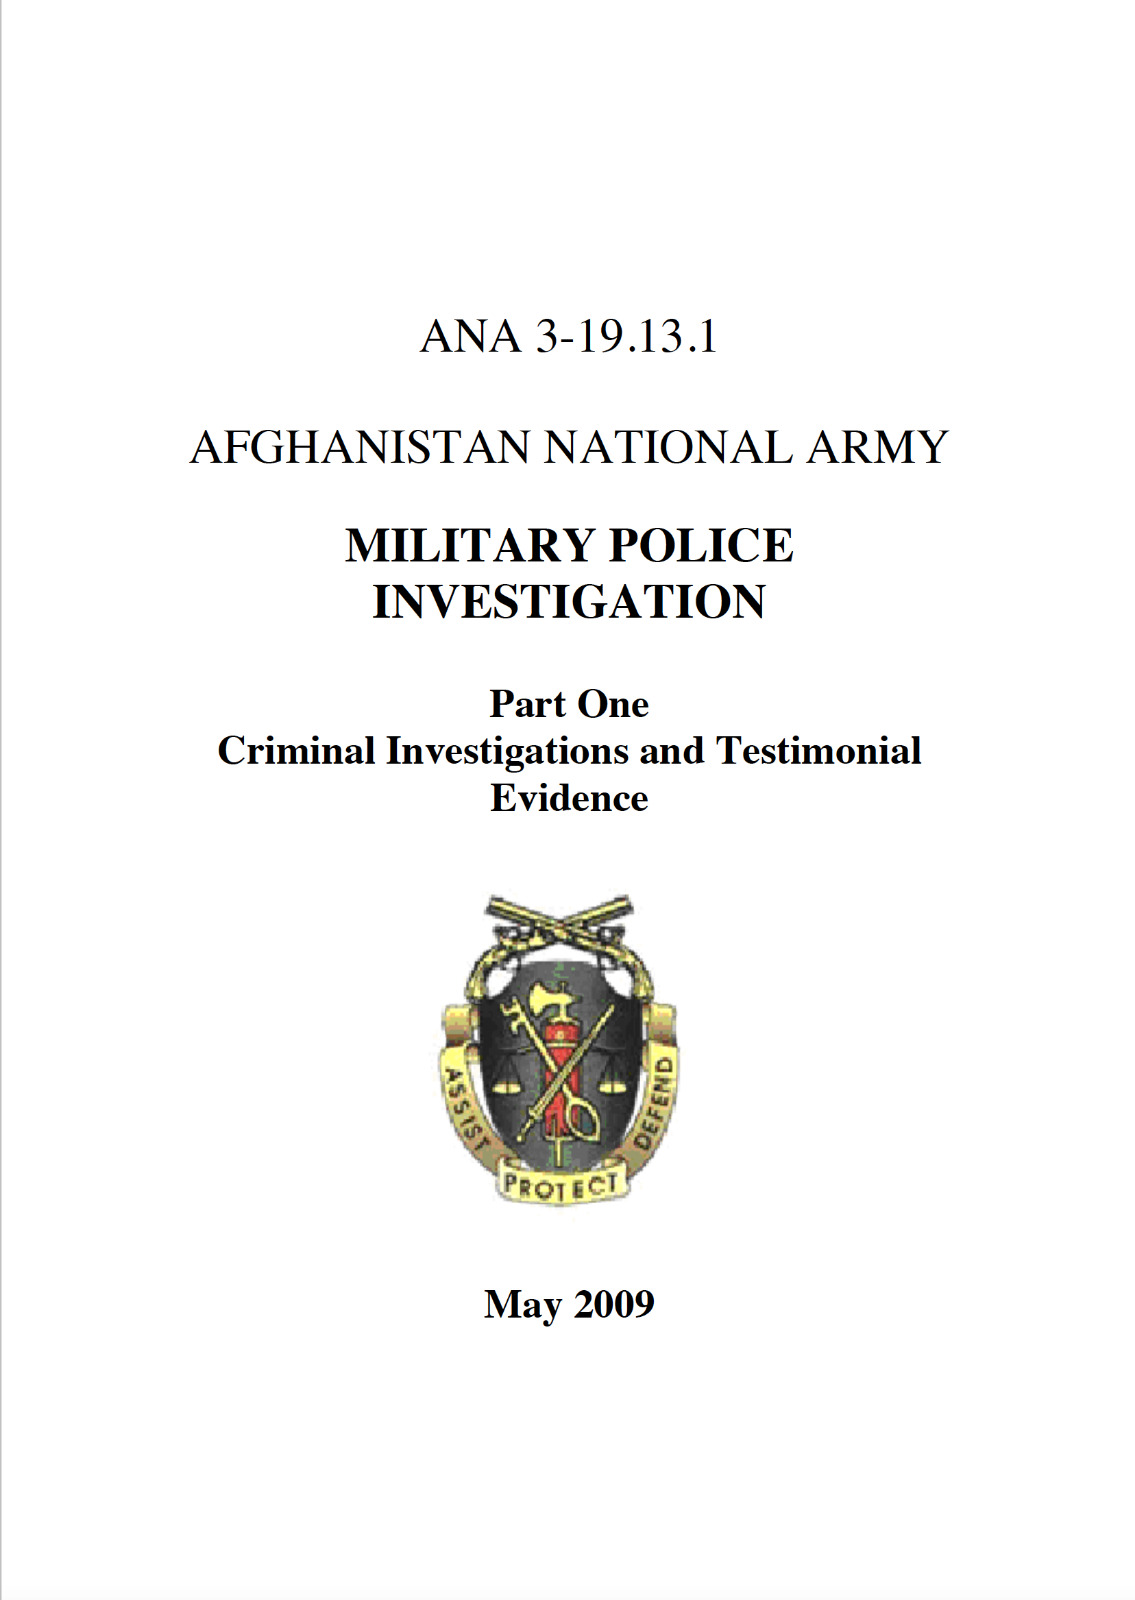 417 Page AFGHANISTAN NATIONAL ARMY POLICE MP CRIME INVESTIGATION Manual on CD